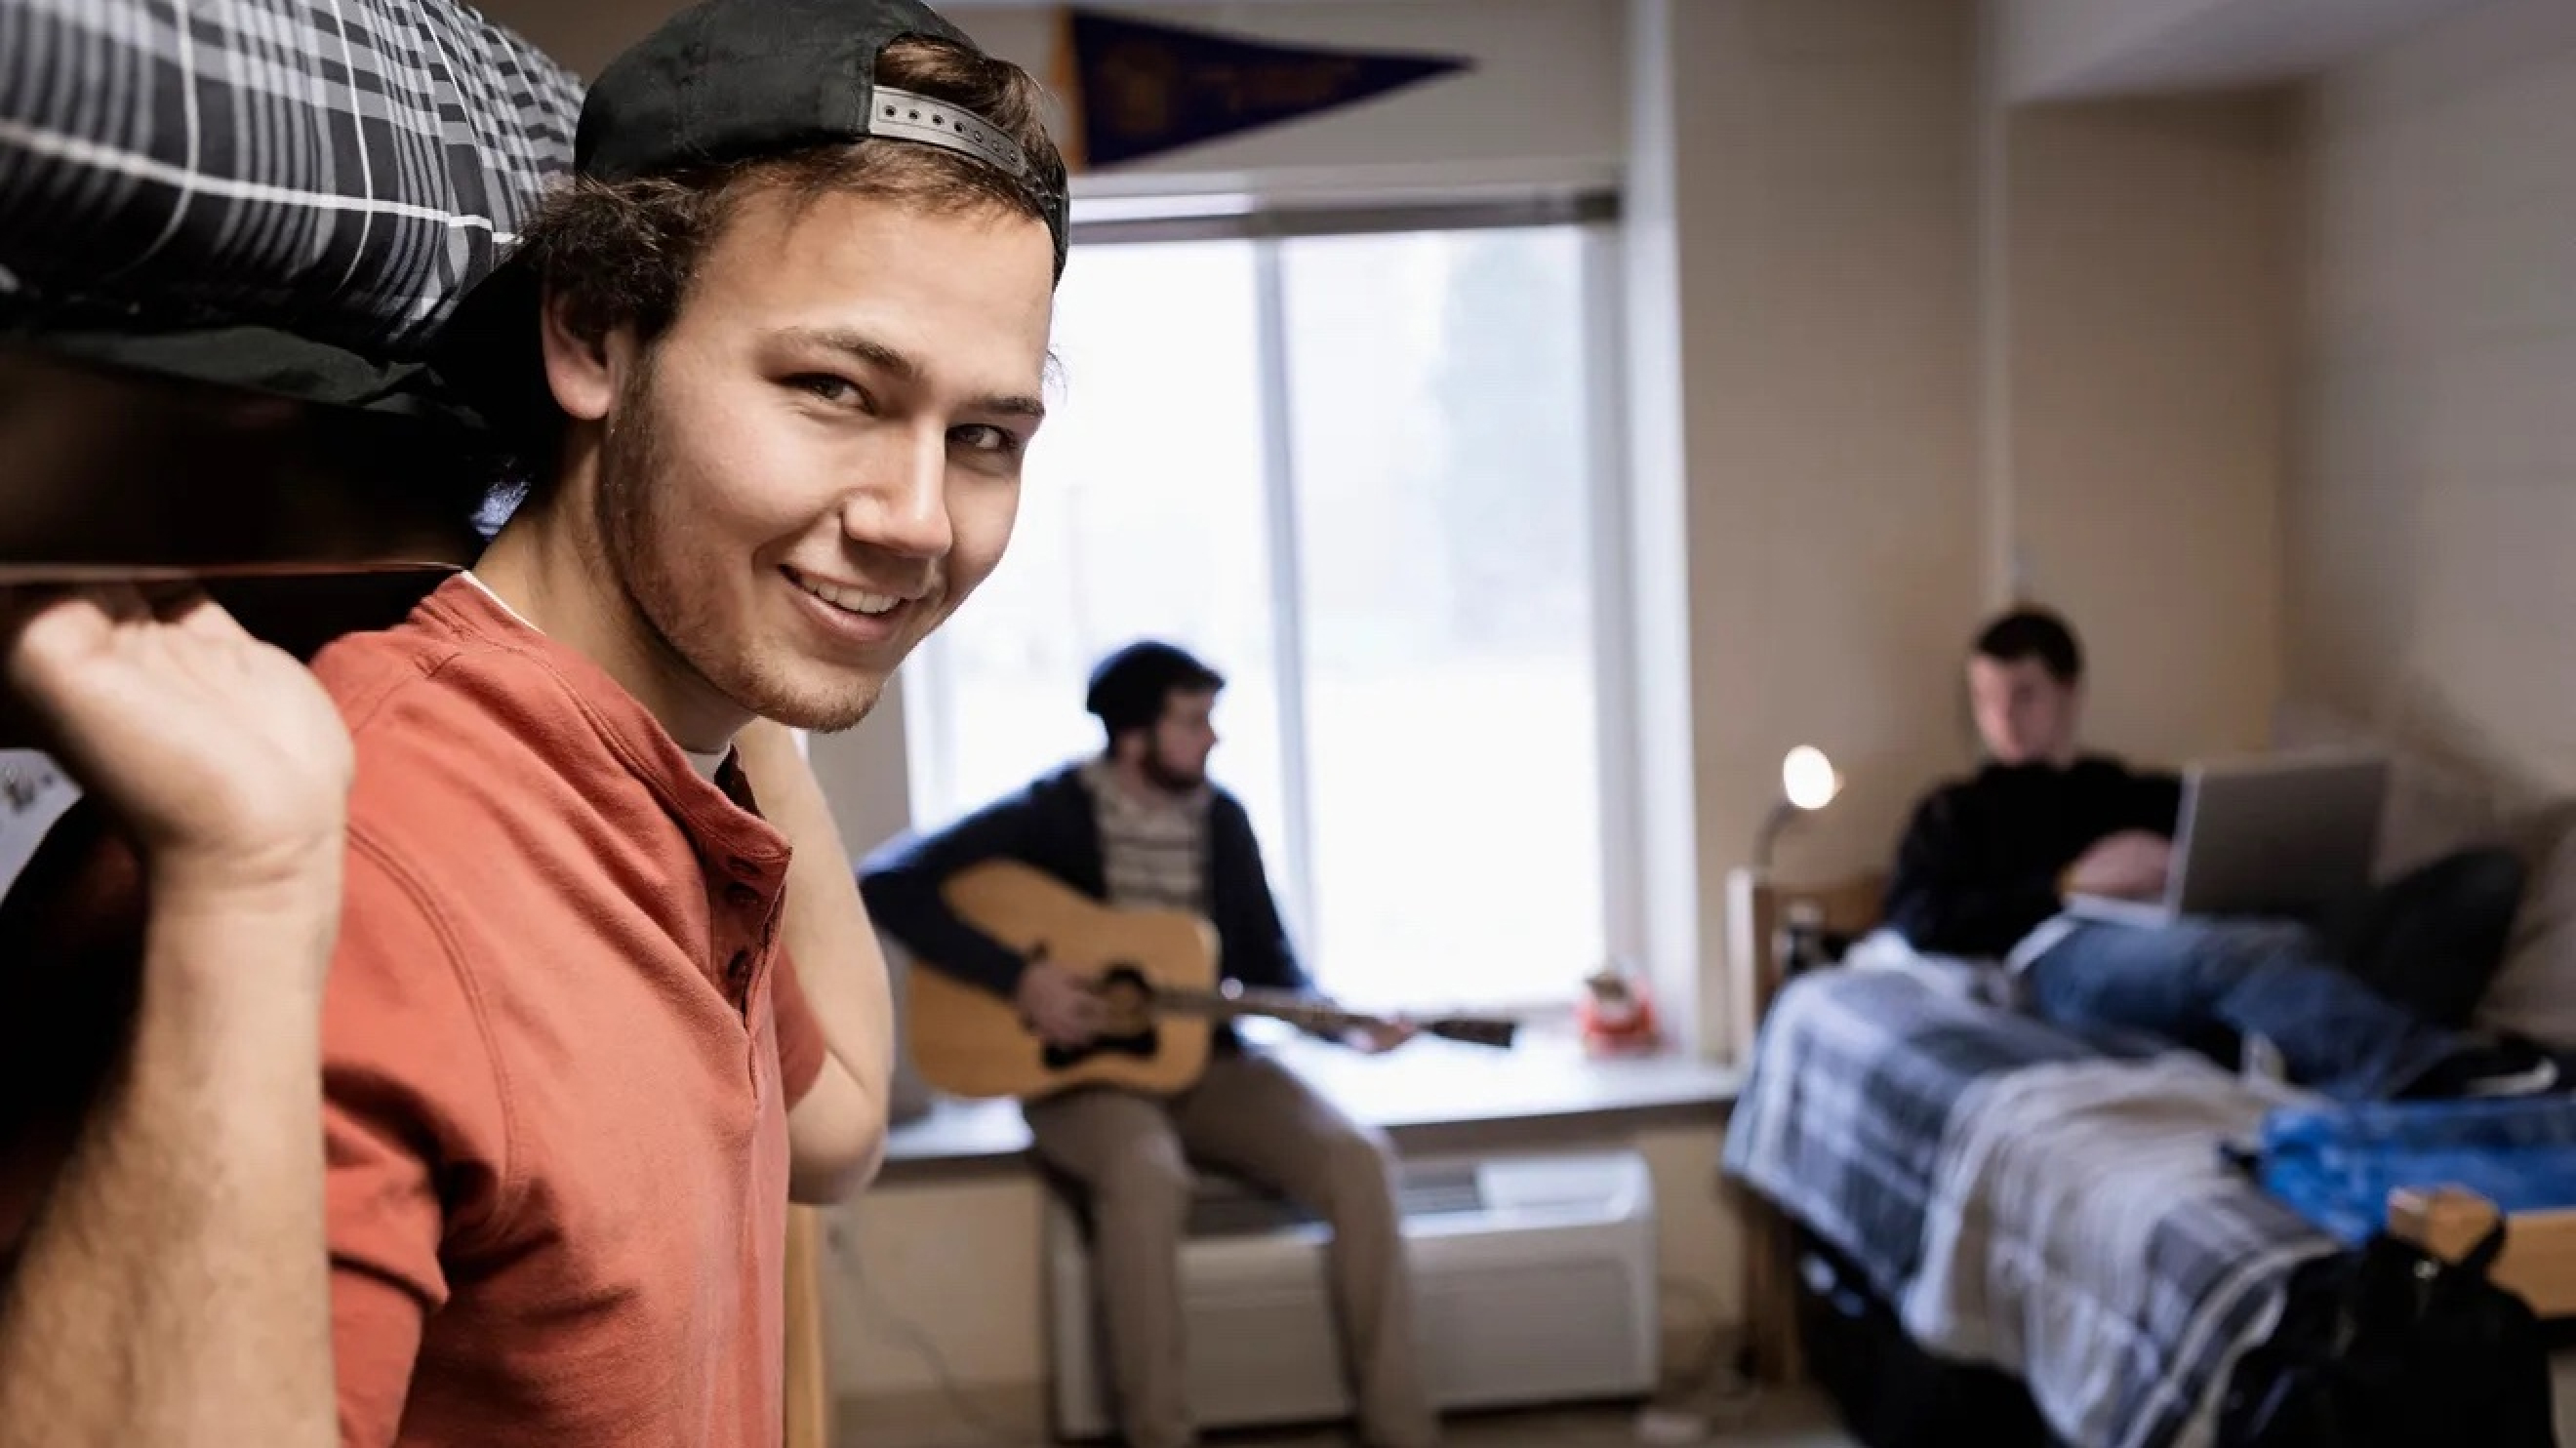 A young man in a light red shirt smiles toward the camera, leaning out from under a bunk bed. Behind him, two other young men play a guitar and work on a computer in this dorm room setting.